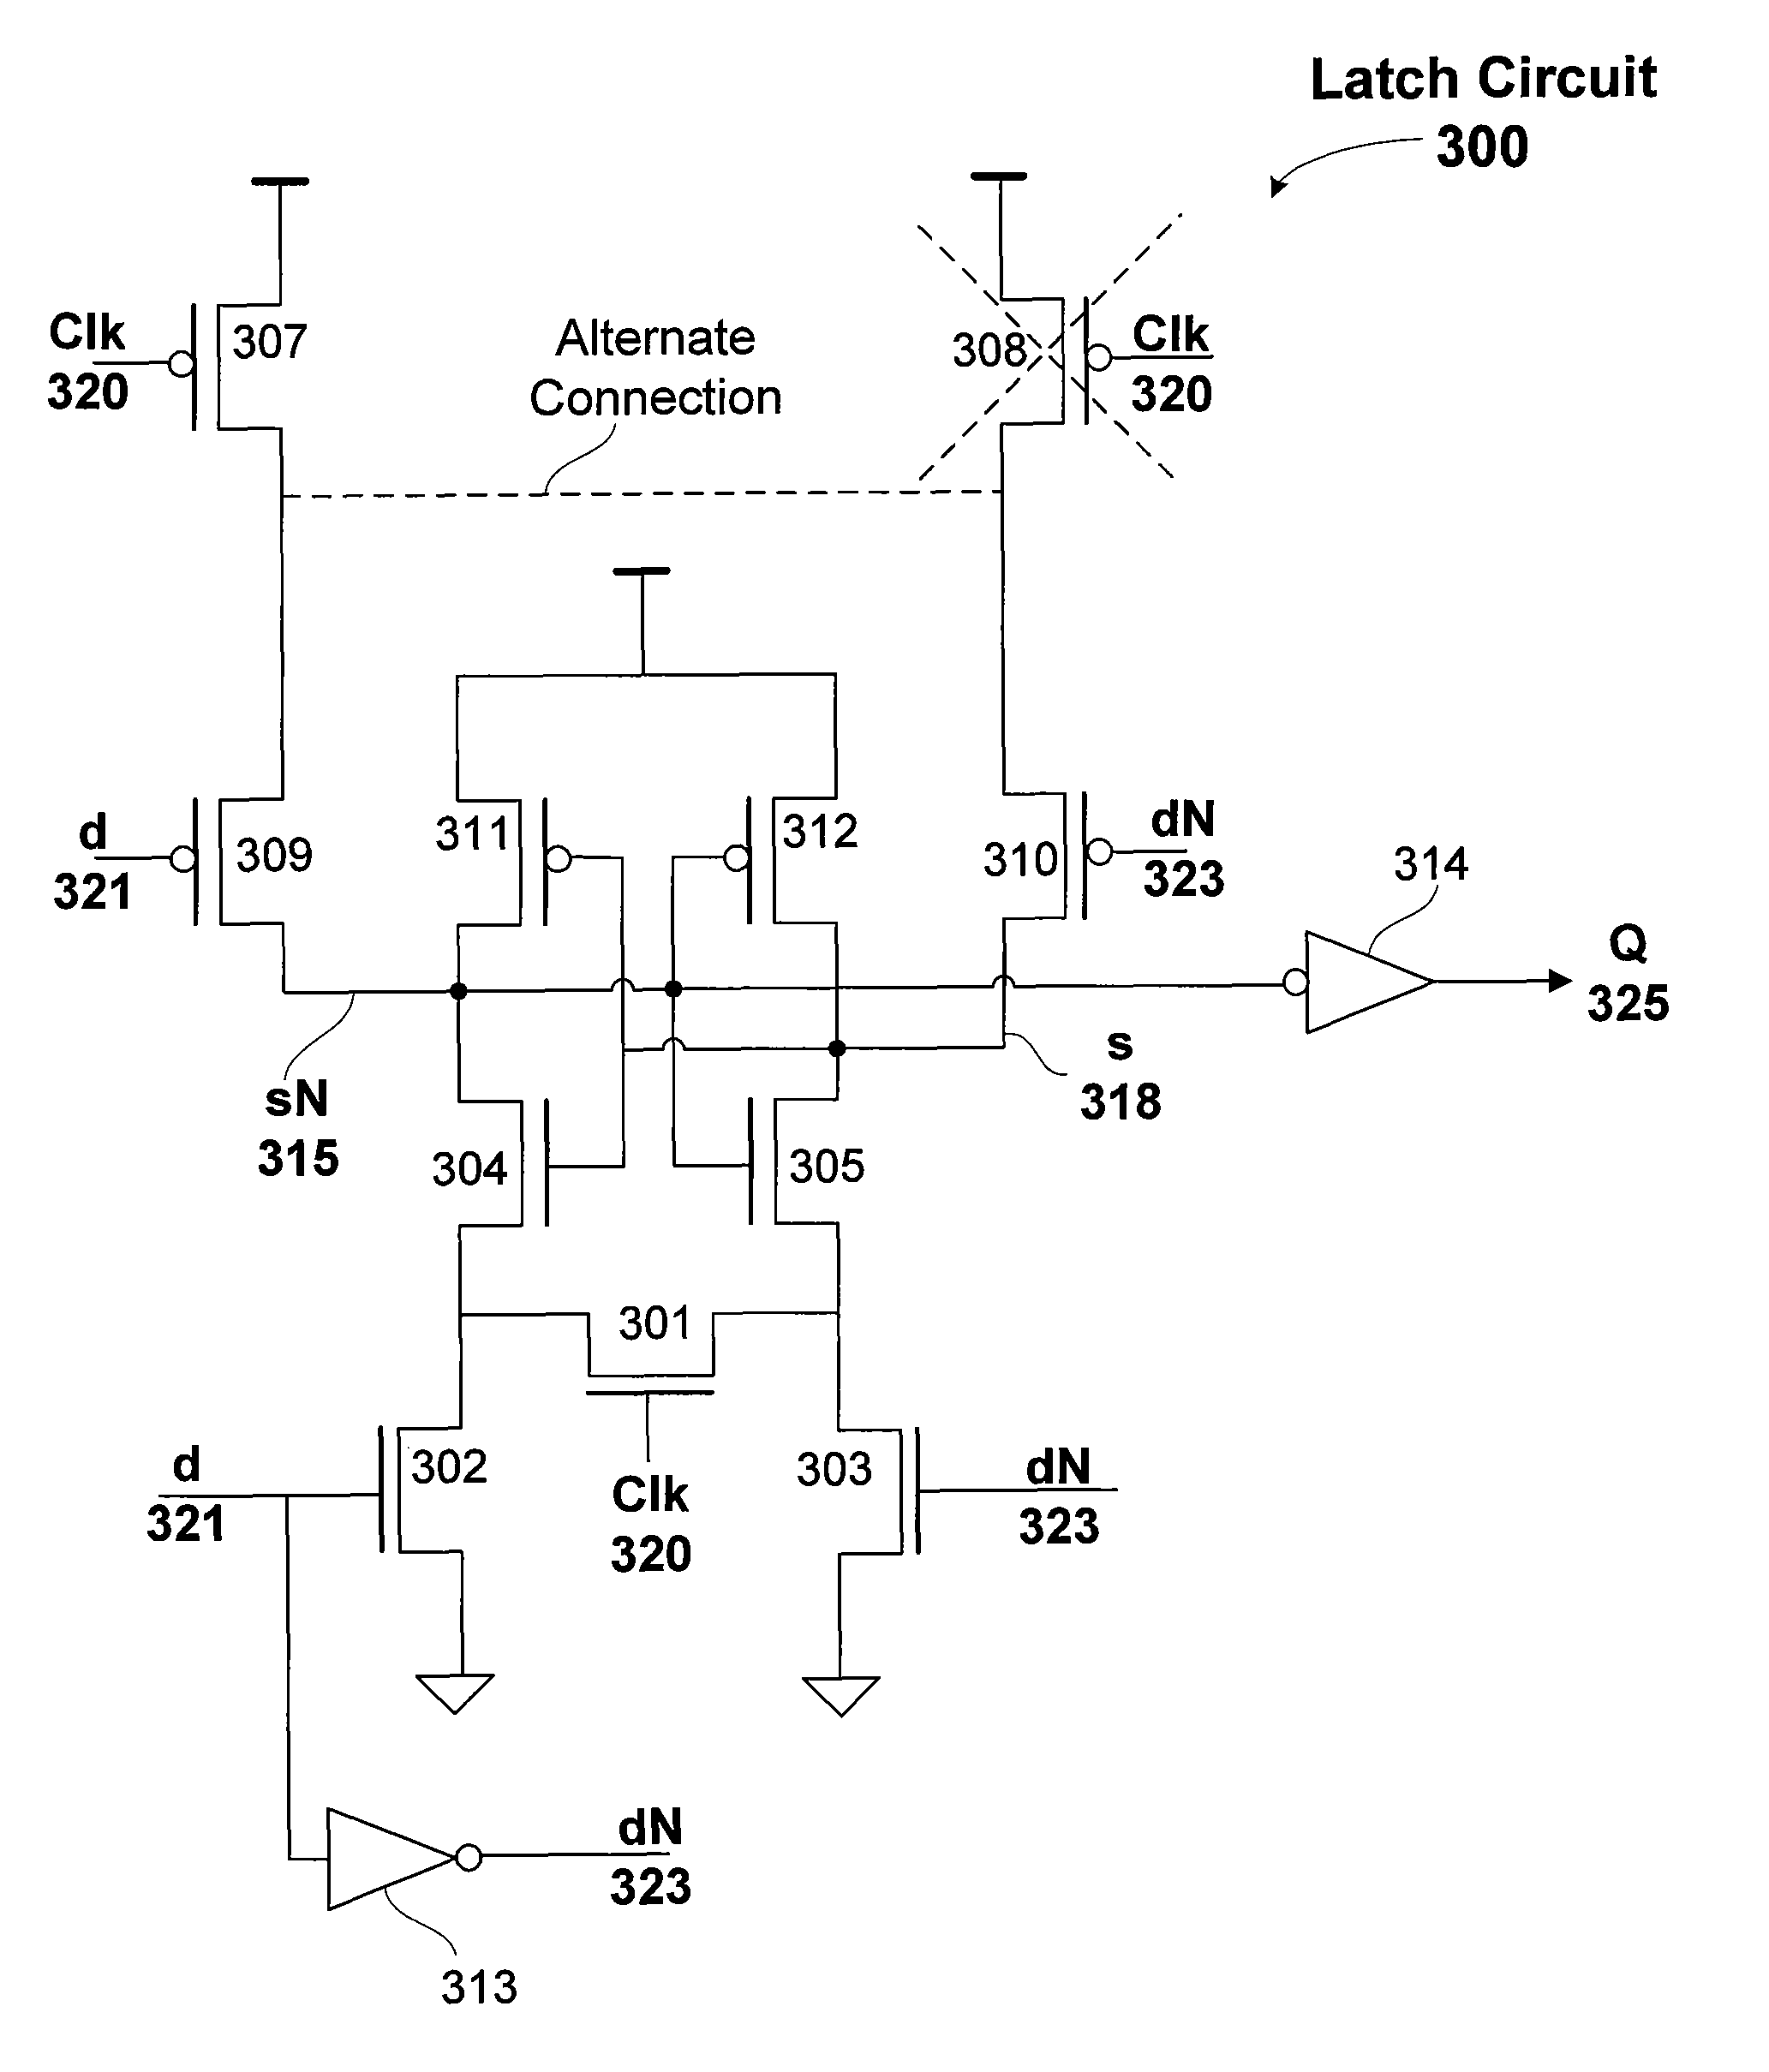 Latch circuit with a bridging device